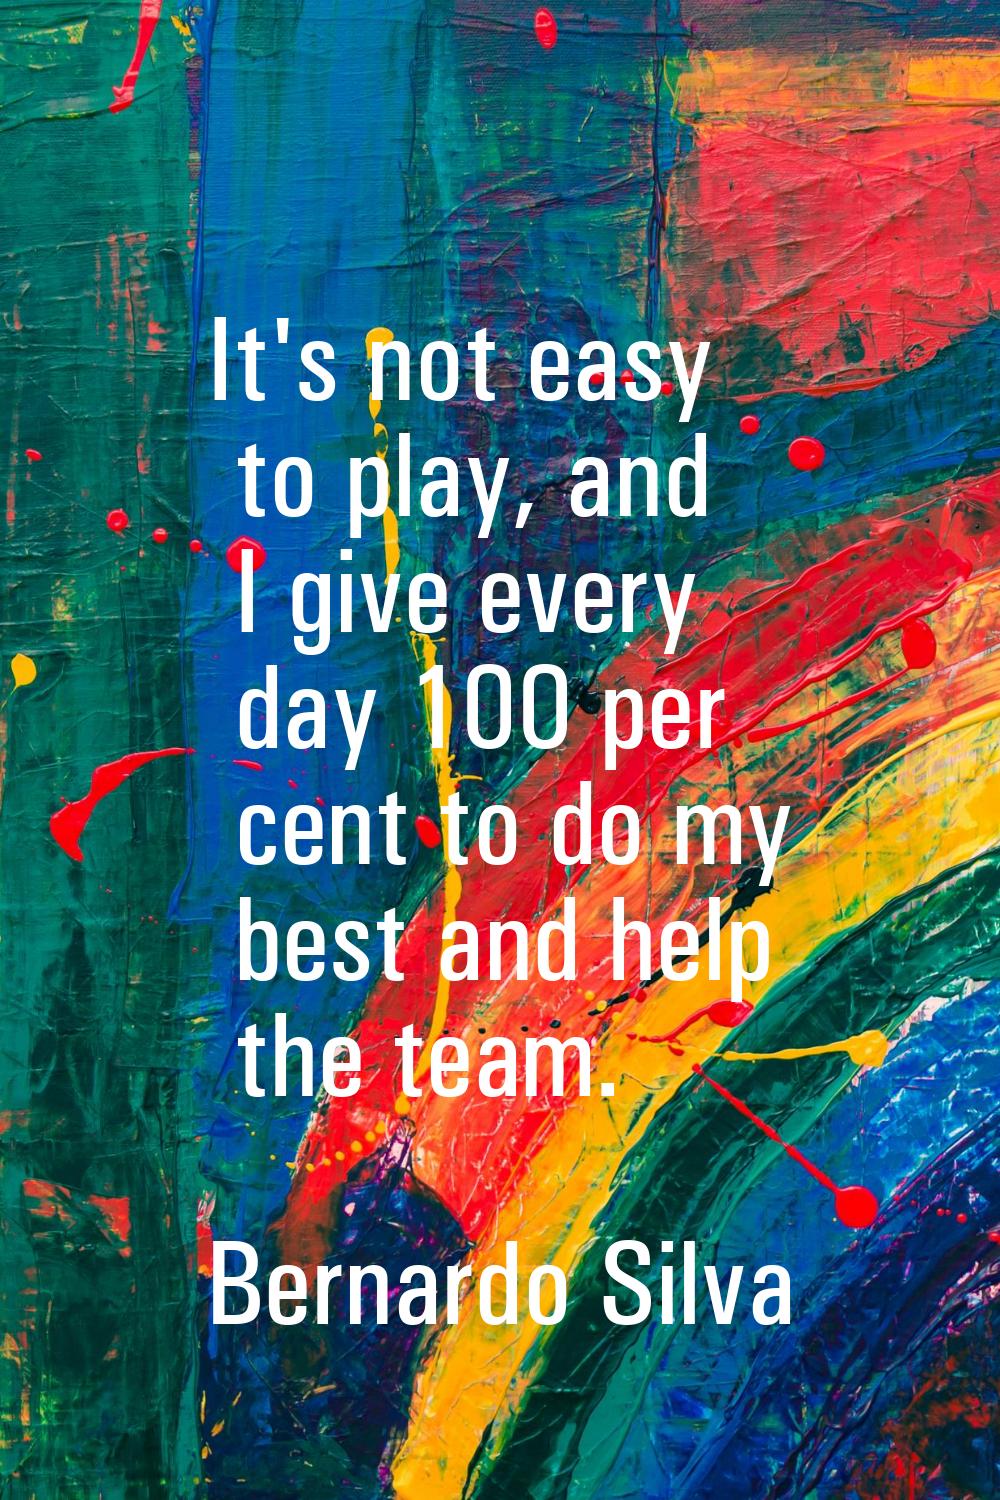 It's not easy to play, and I give every day 100 per cent to do my best and help the team.